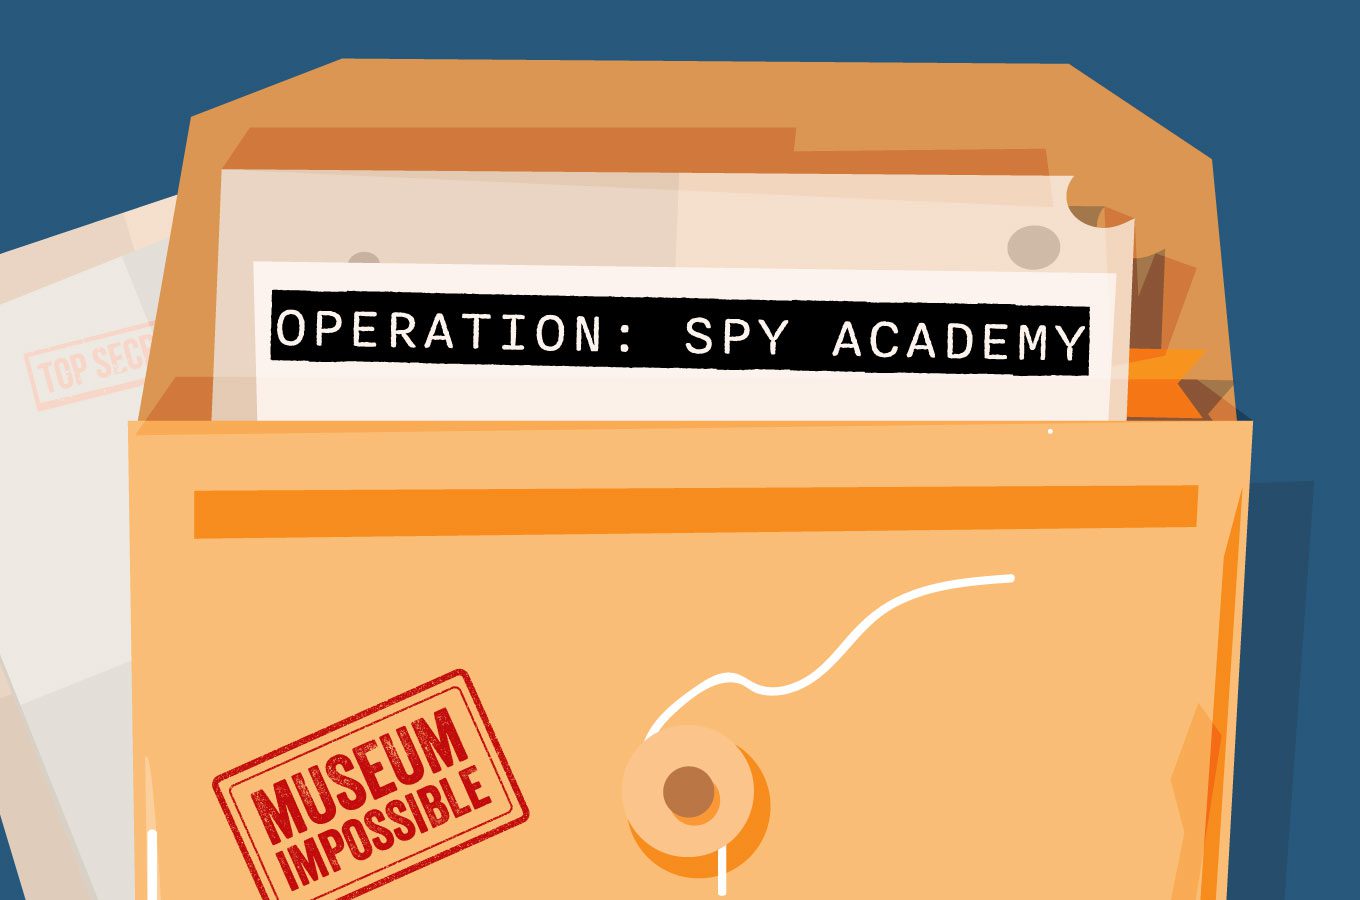 Museum Impossible – Operation: Spy Academy